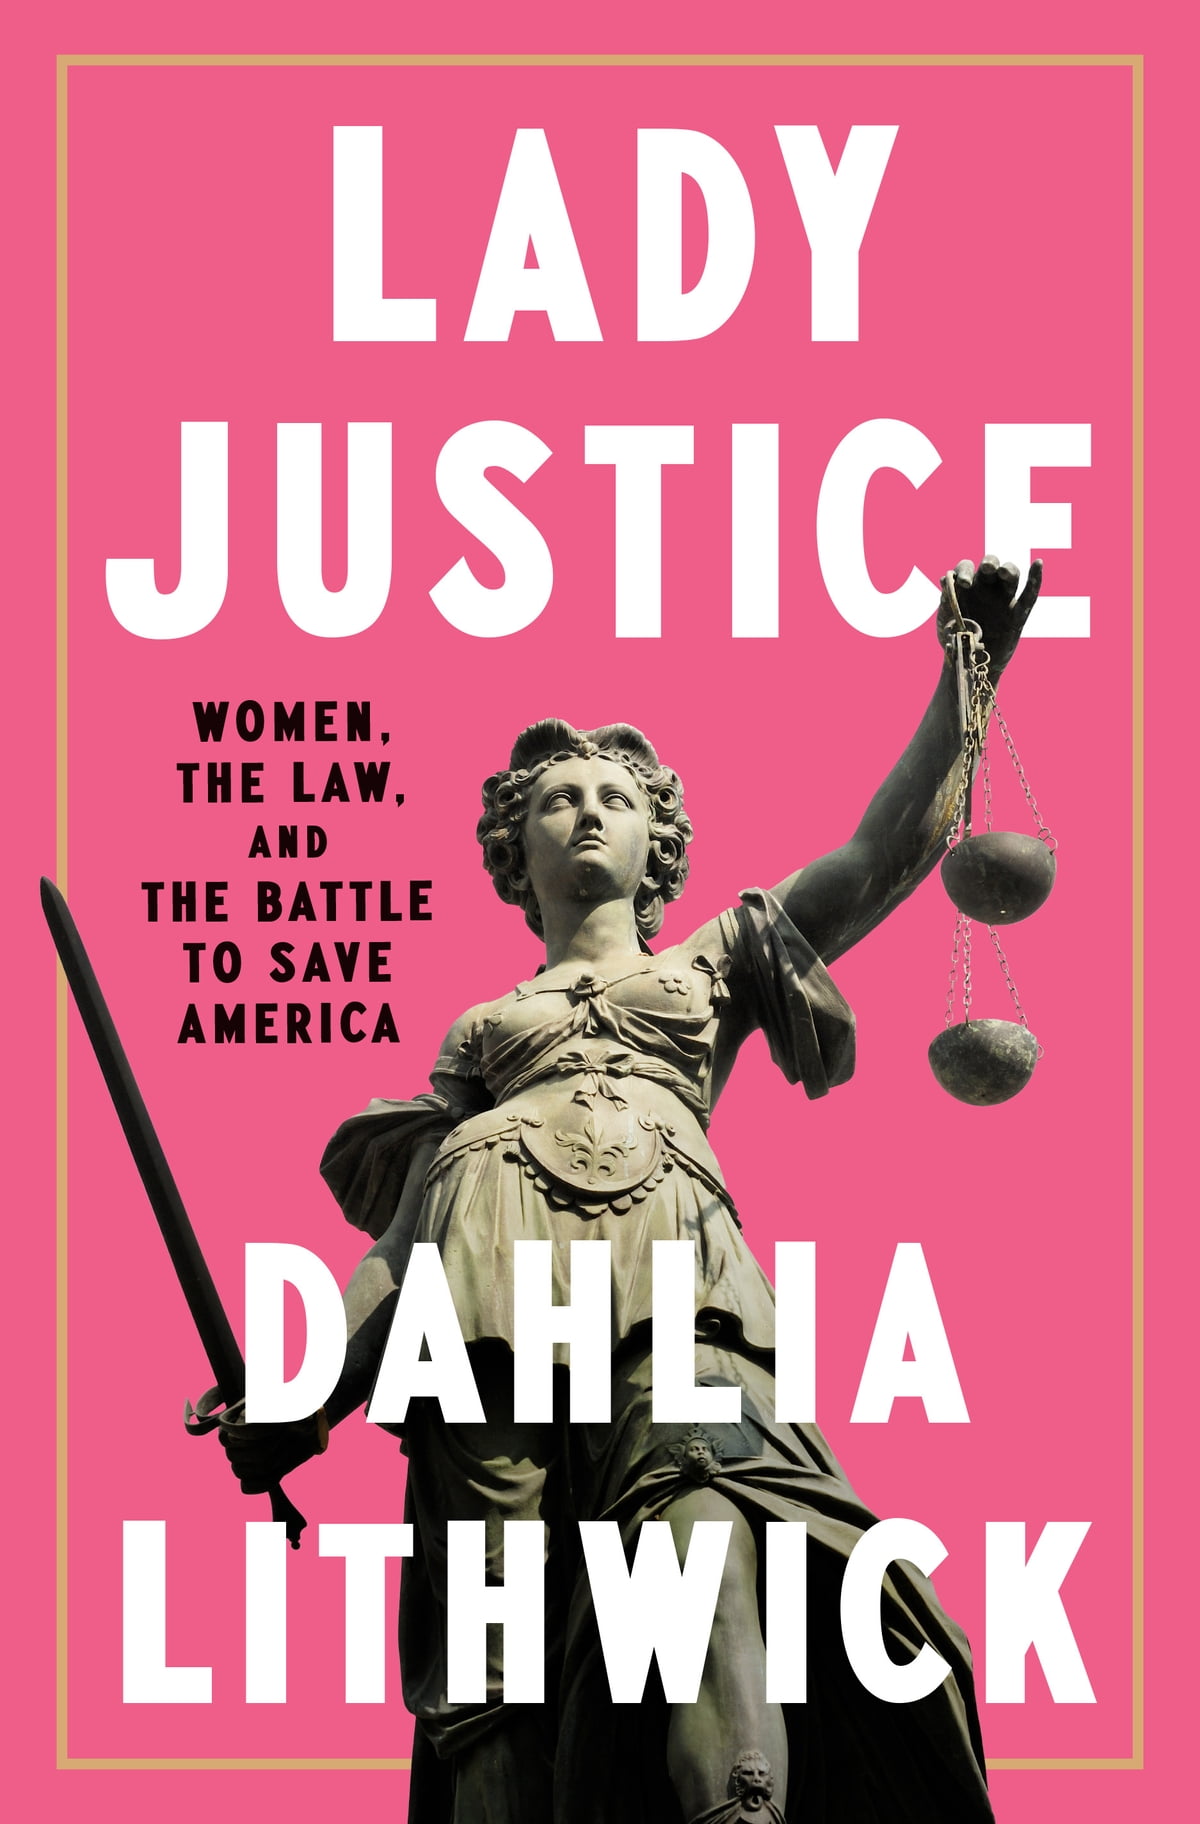 book cover of dahlia lithwicks book lady justice women the law and the battle to save america